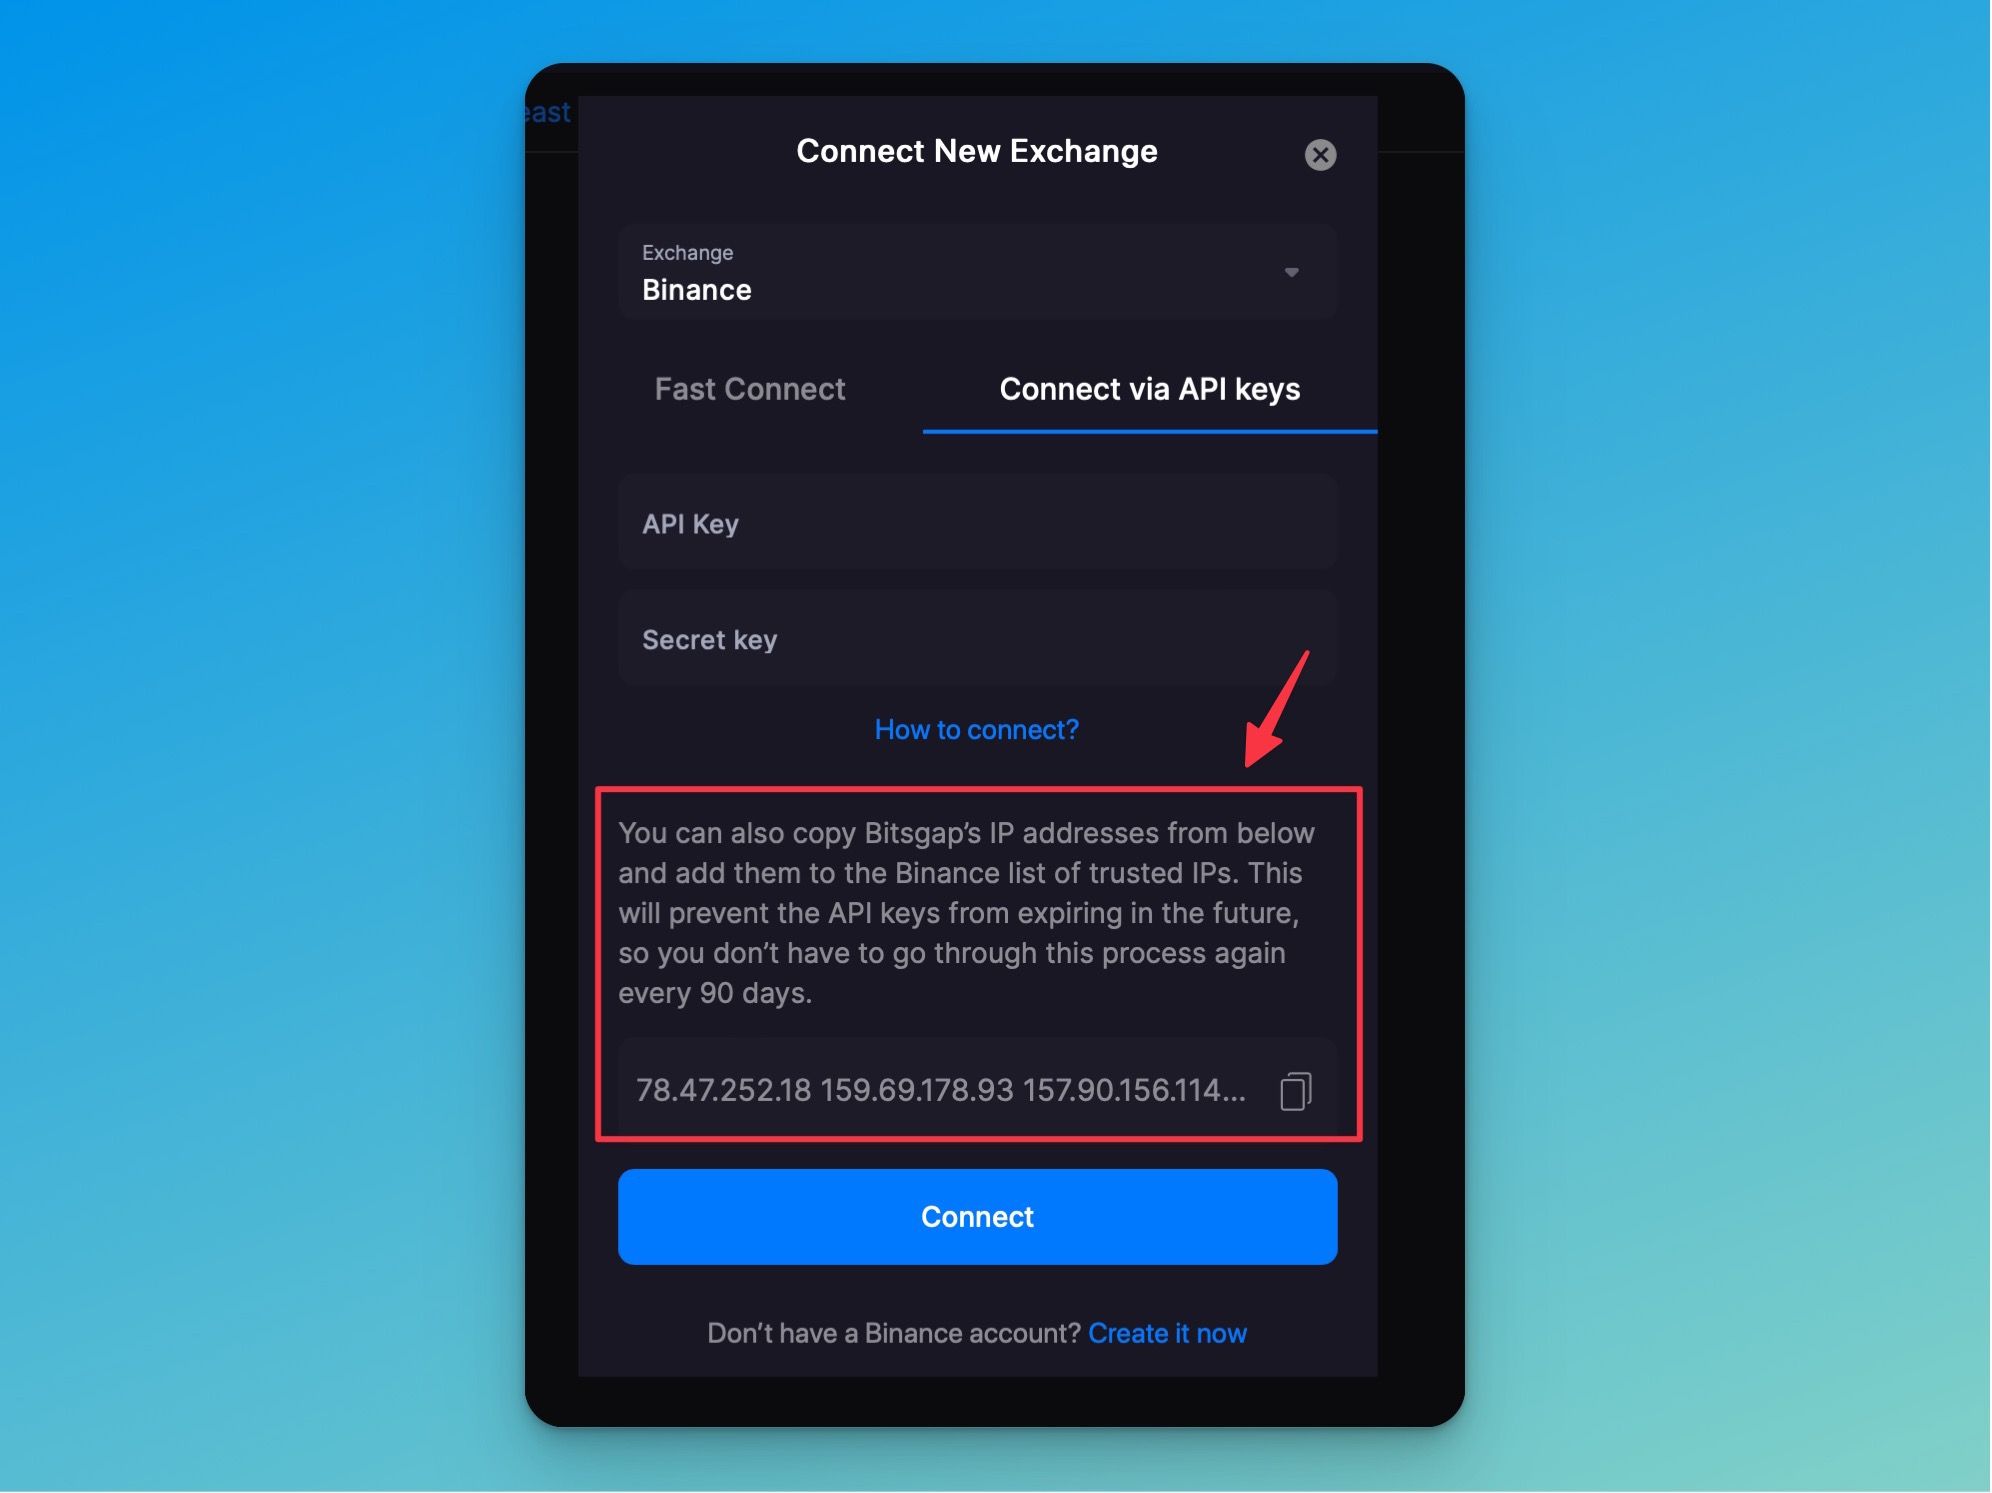 Pic. 4. Copy Bitsgap’s IP addresses from the Connect New Exchange window to add them to the whitelisted IPs on your exchange. 